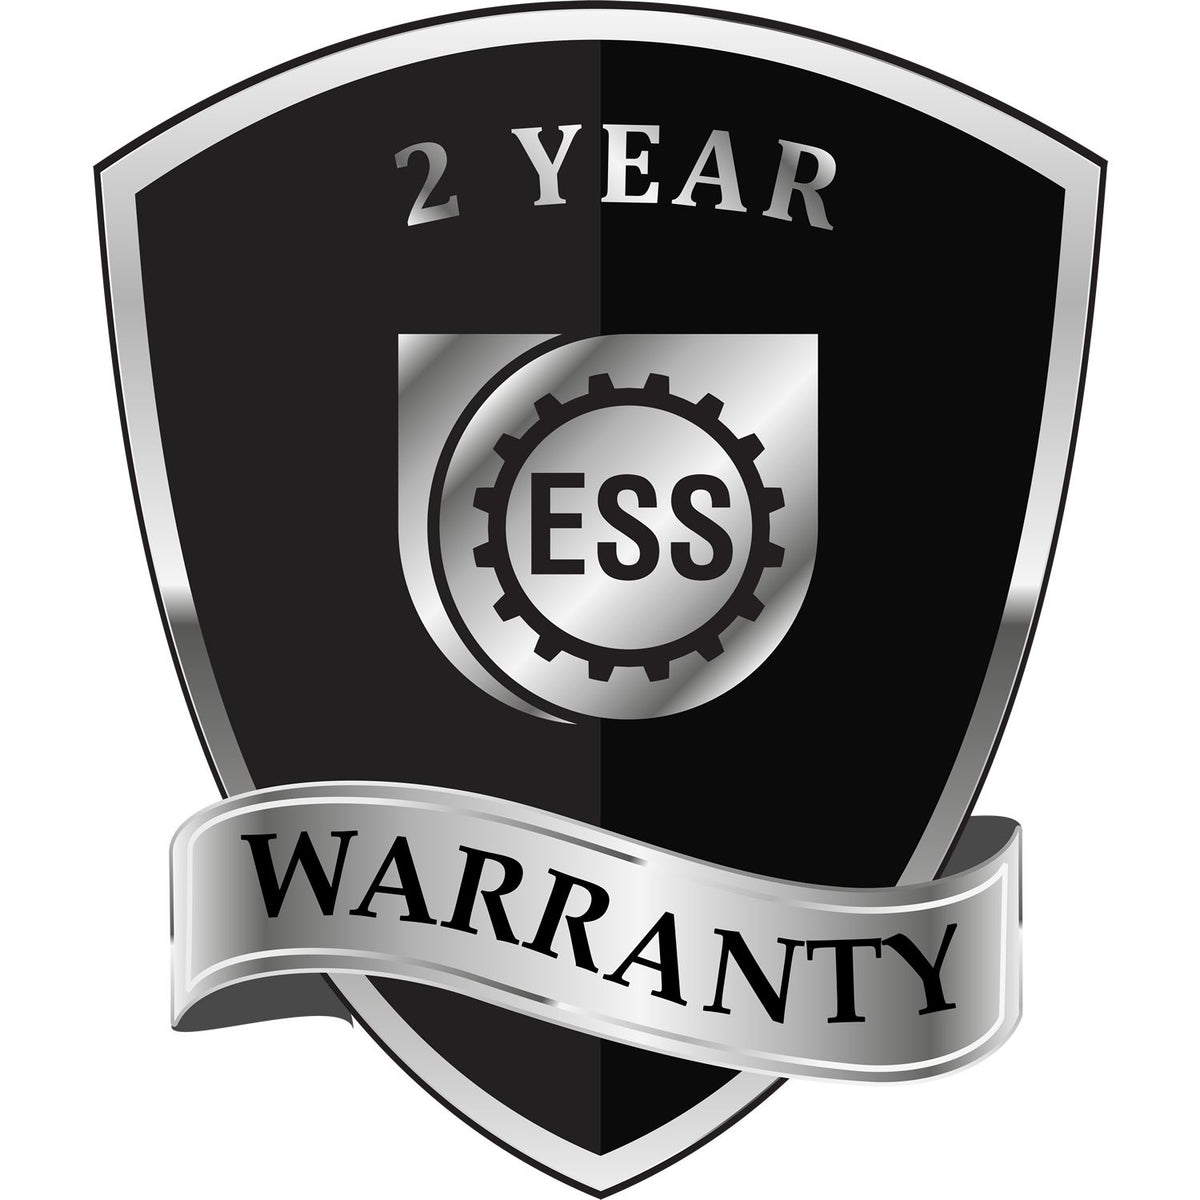 A badge or emblem showing a warranty icon for the Long Reach Alabama Land Surveyor Seal